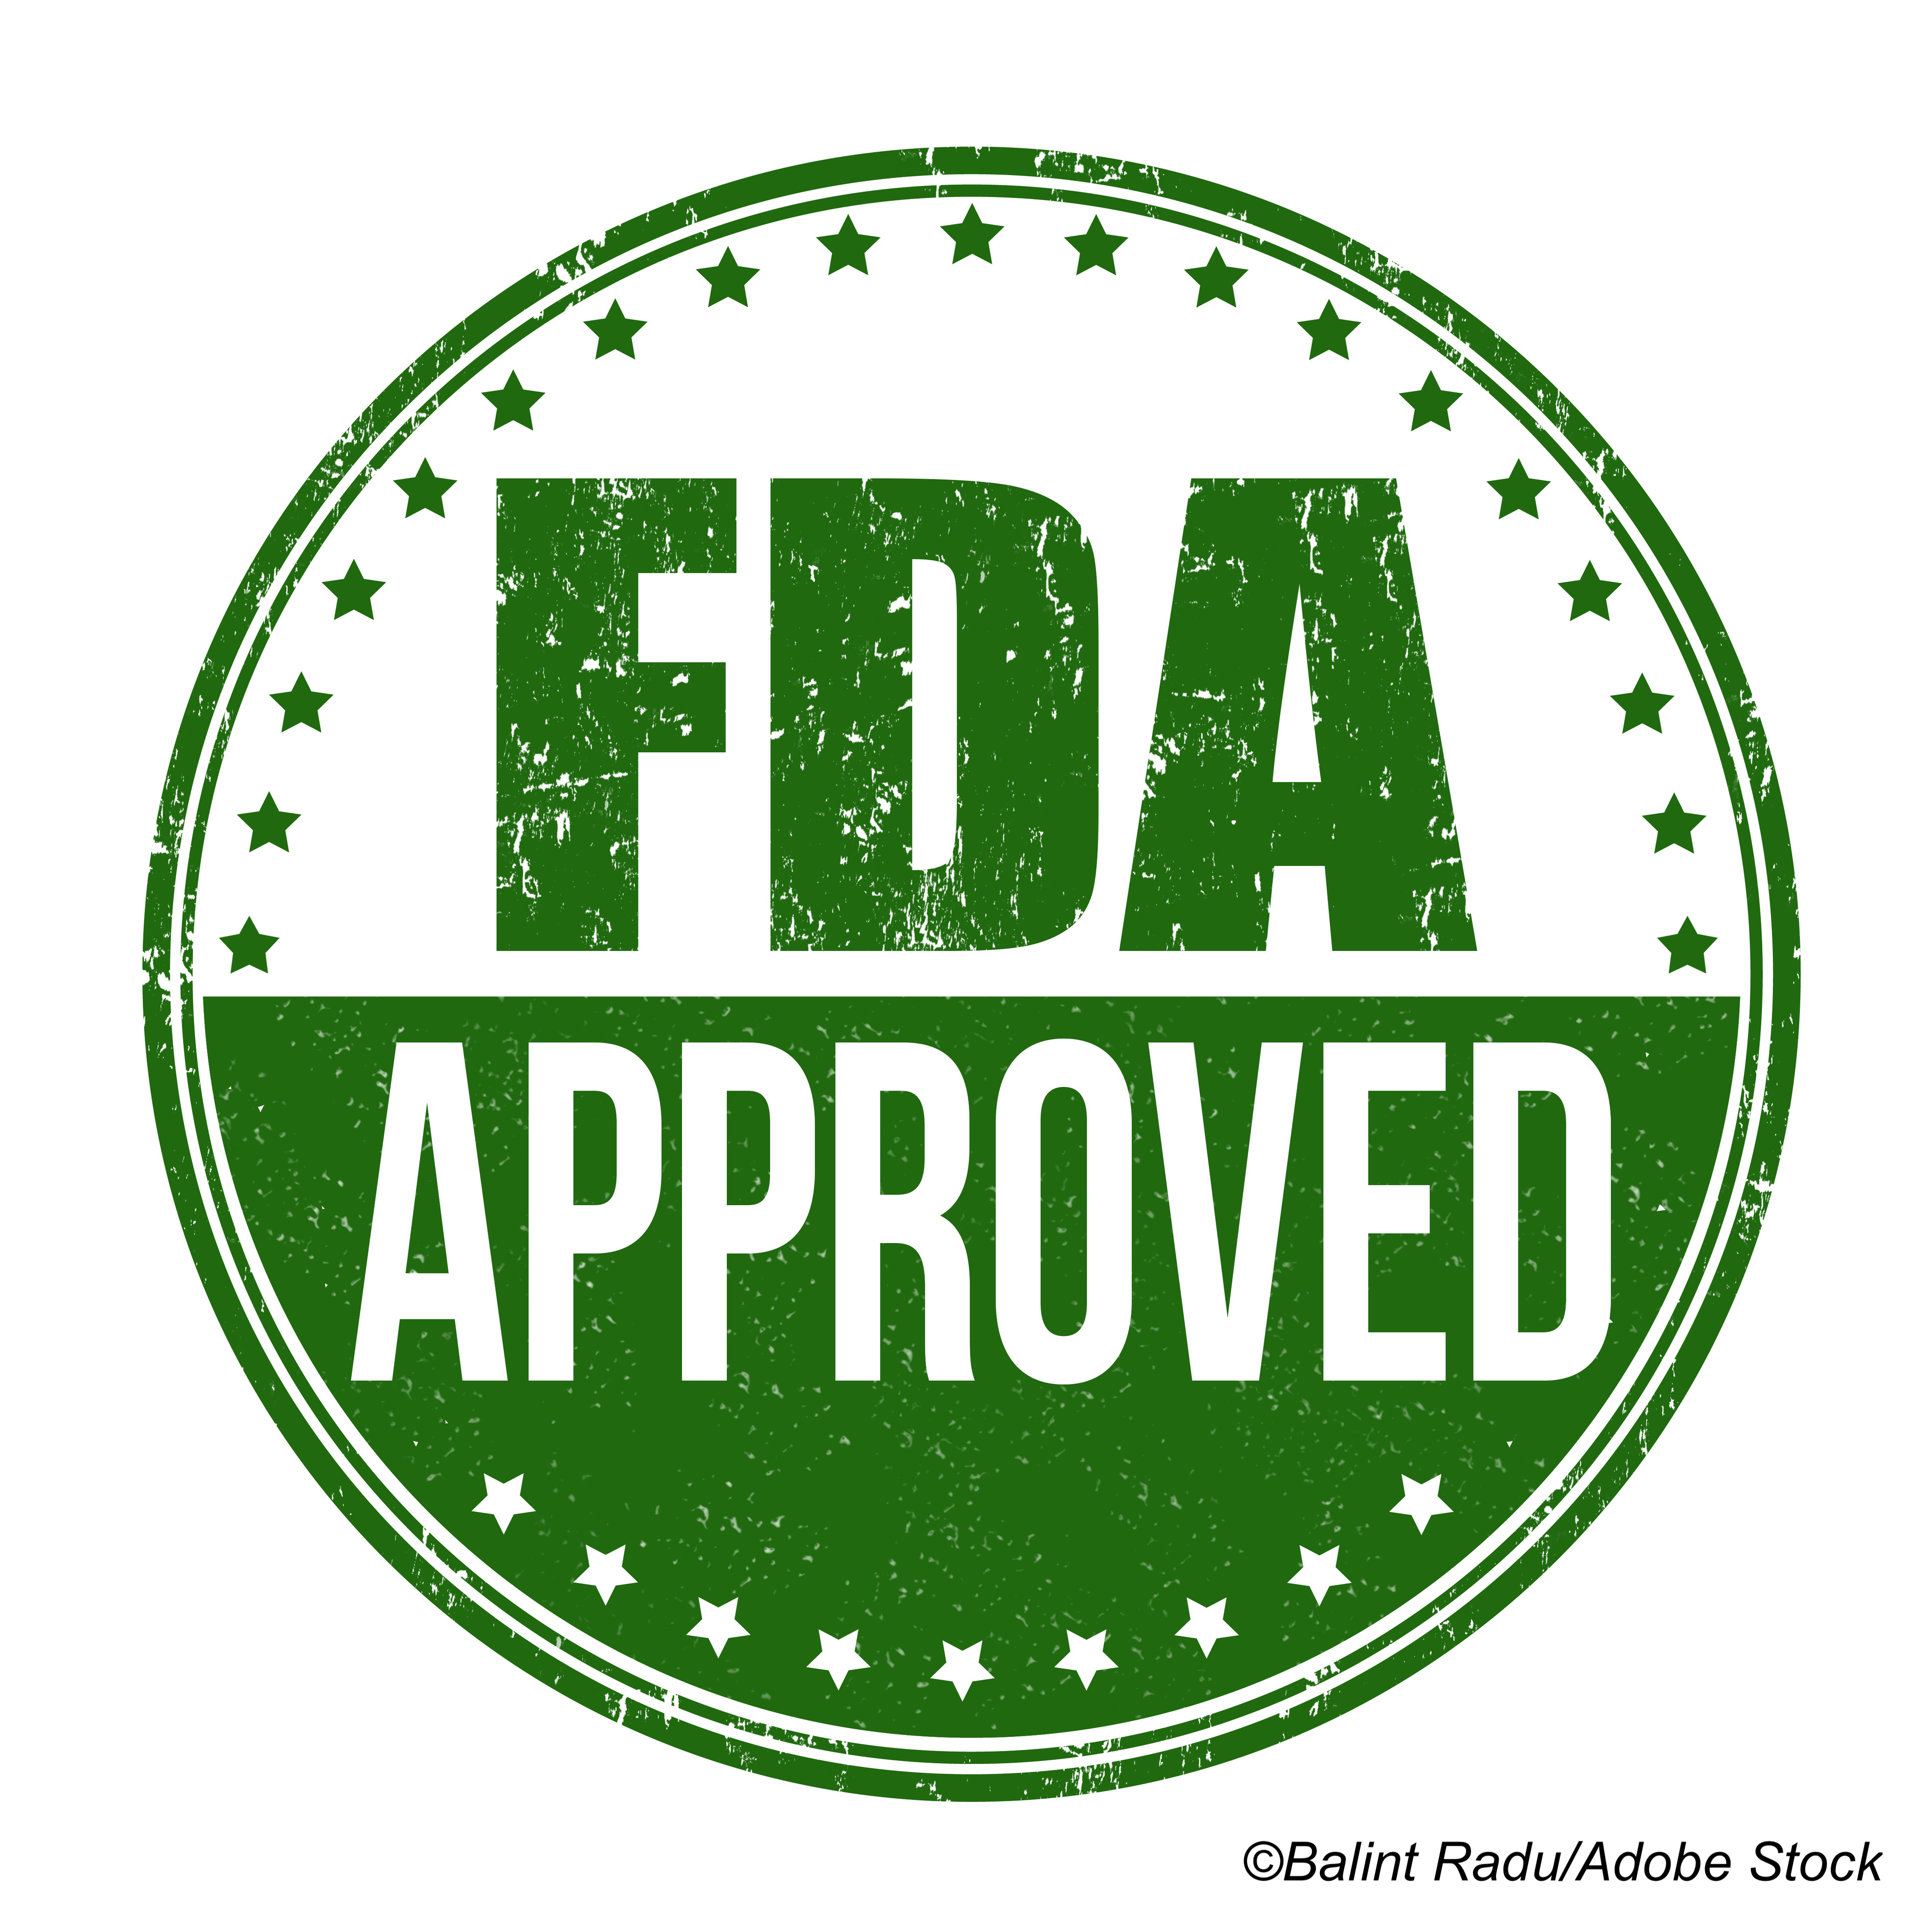 FDA Gives Voxelotor Accelerated Approval for Kids with Sickle Cell Disease